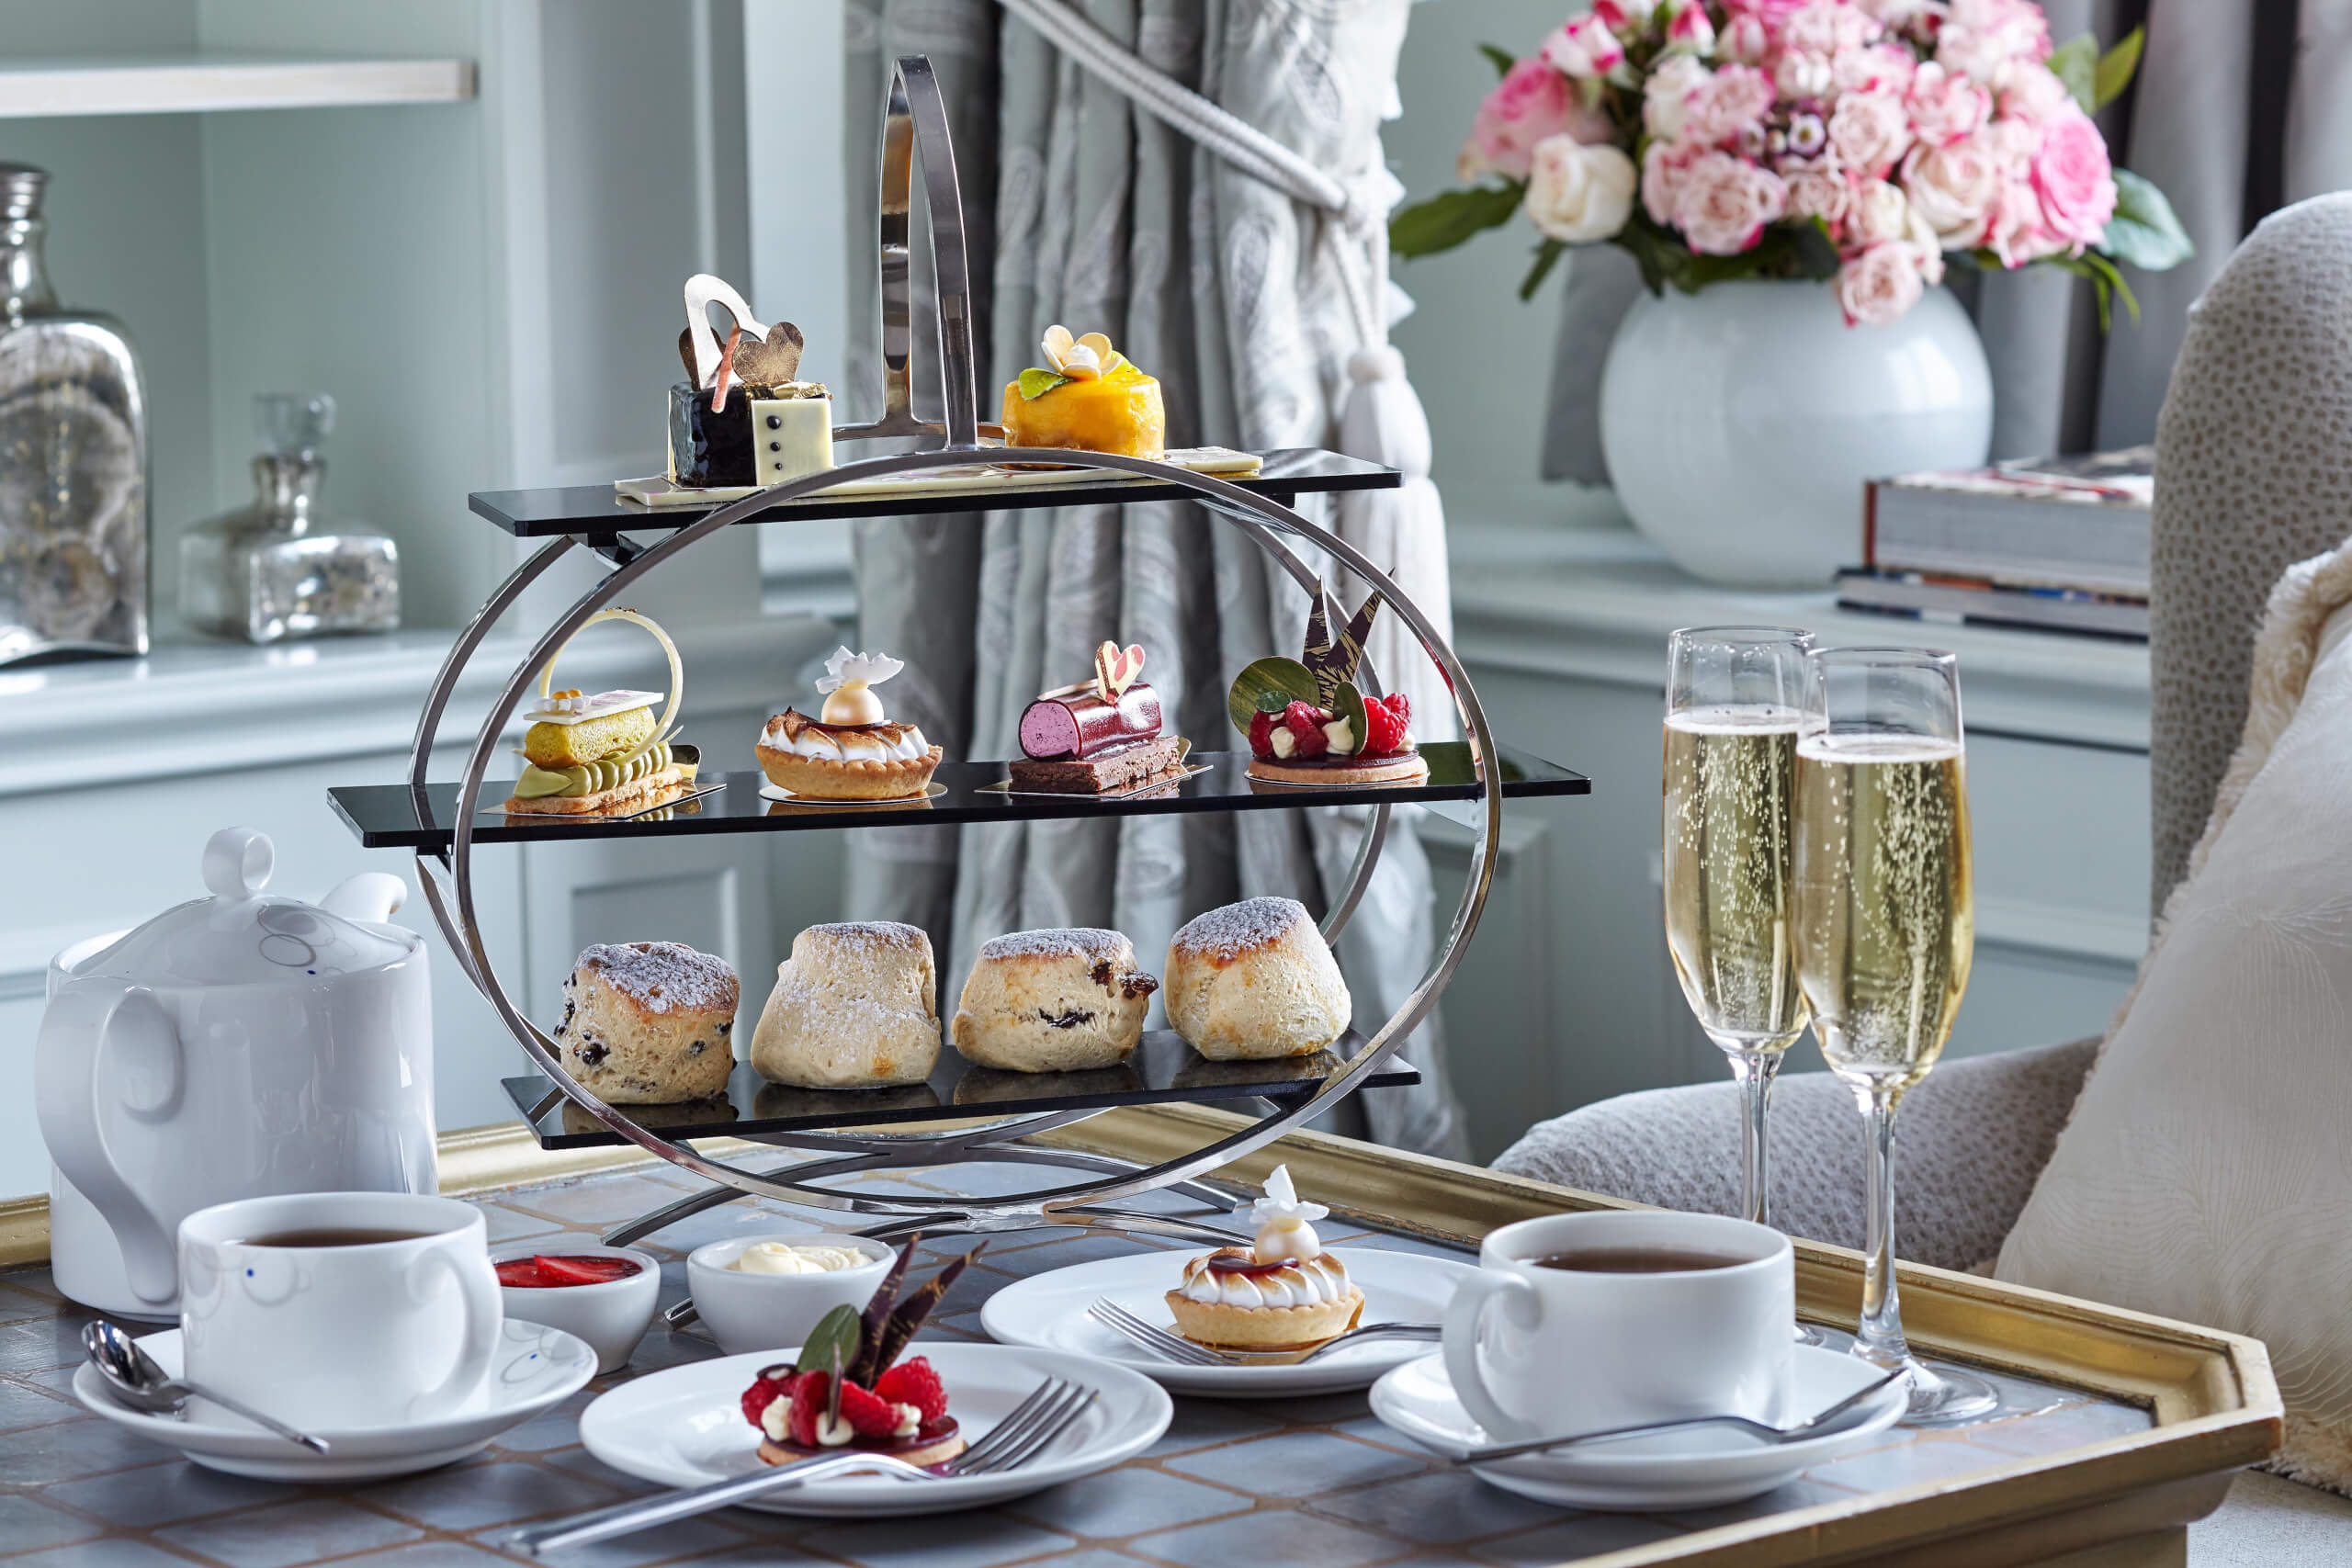 Mother's Day Afternoon Teas in London, best Mother's Day Afternoon Teas in London, afternoon teas in London, mother's day in london, mother's day in london 2017, mother's day 2017, afternoon teas for mums